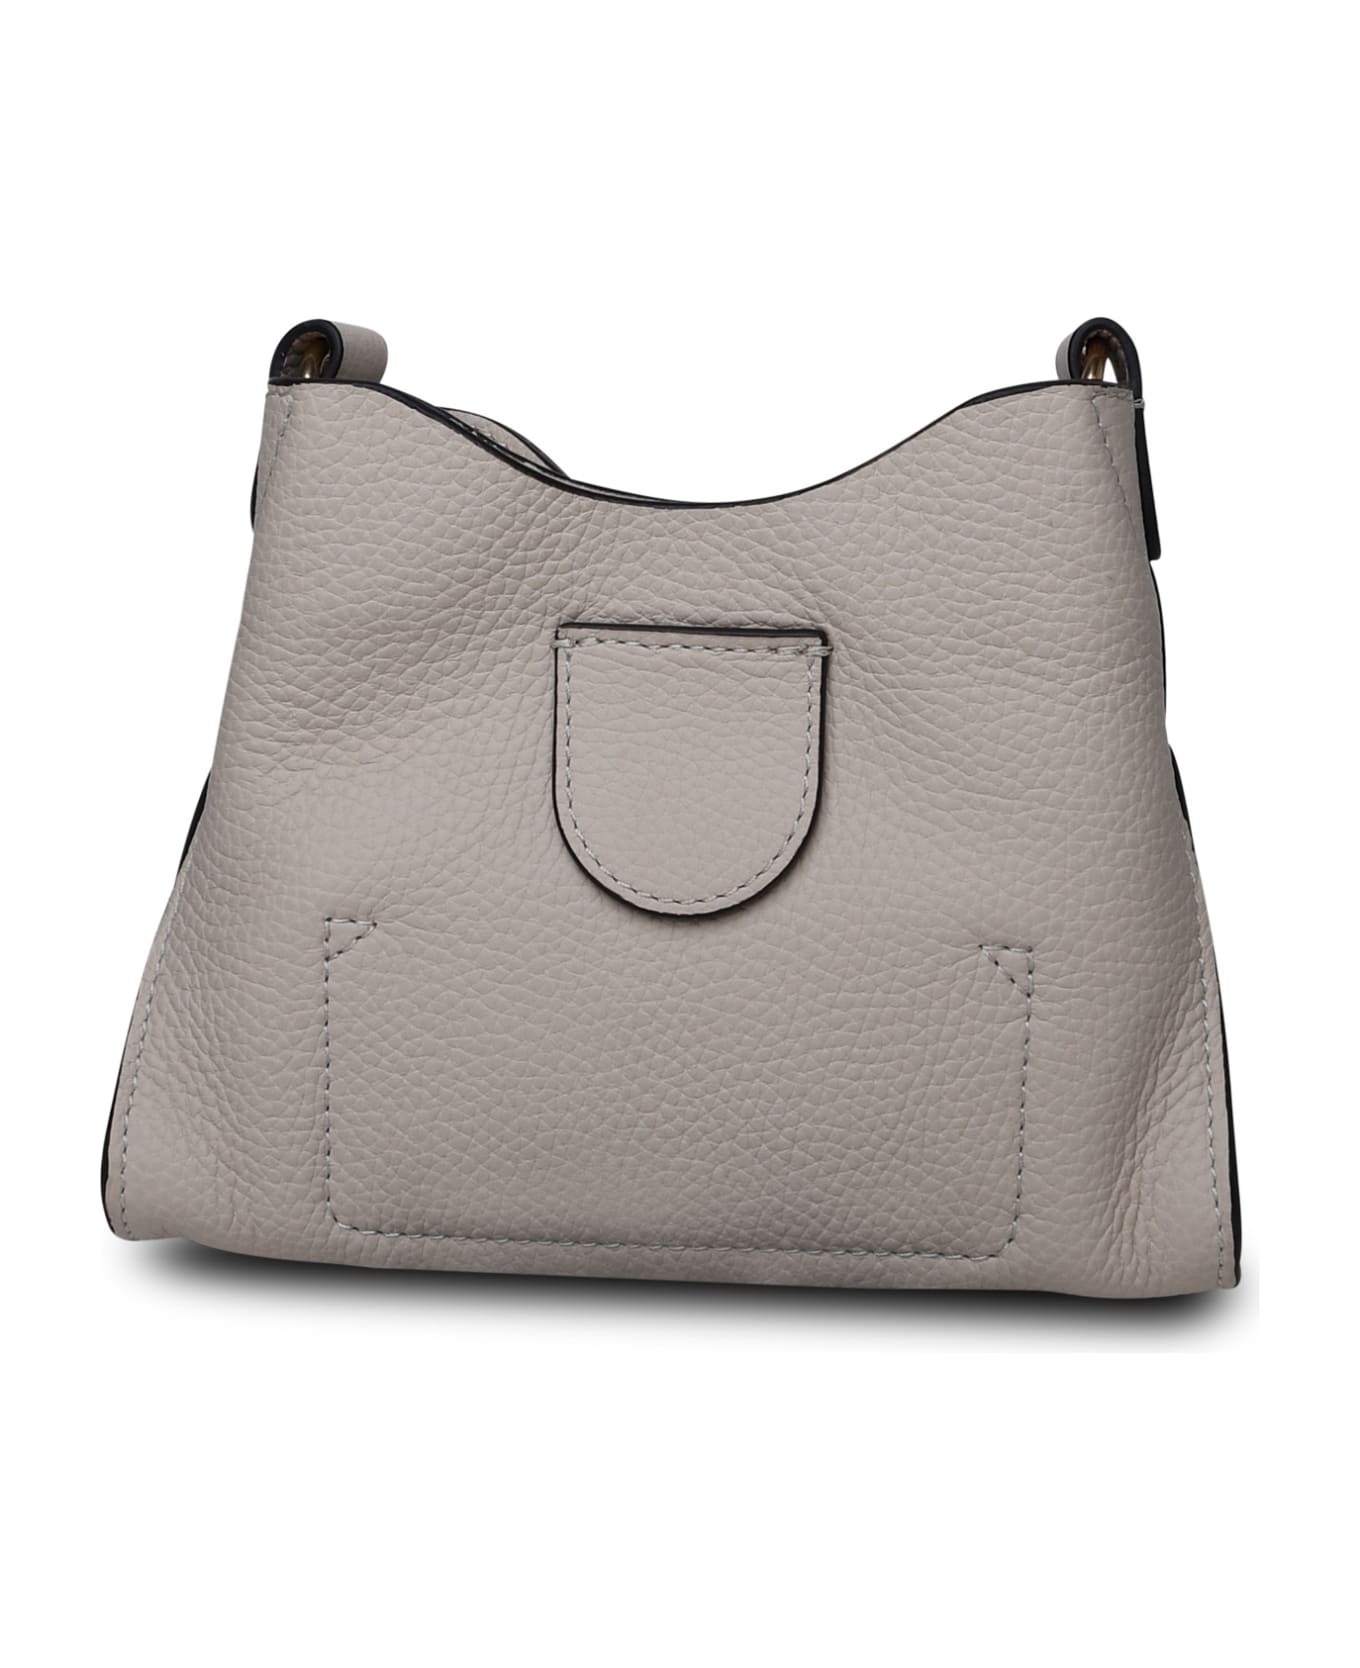 See by Chloé Beige Leather Bag - Beige トートバッグ